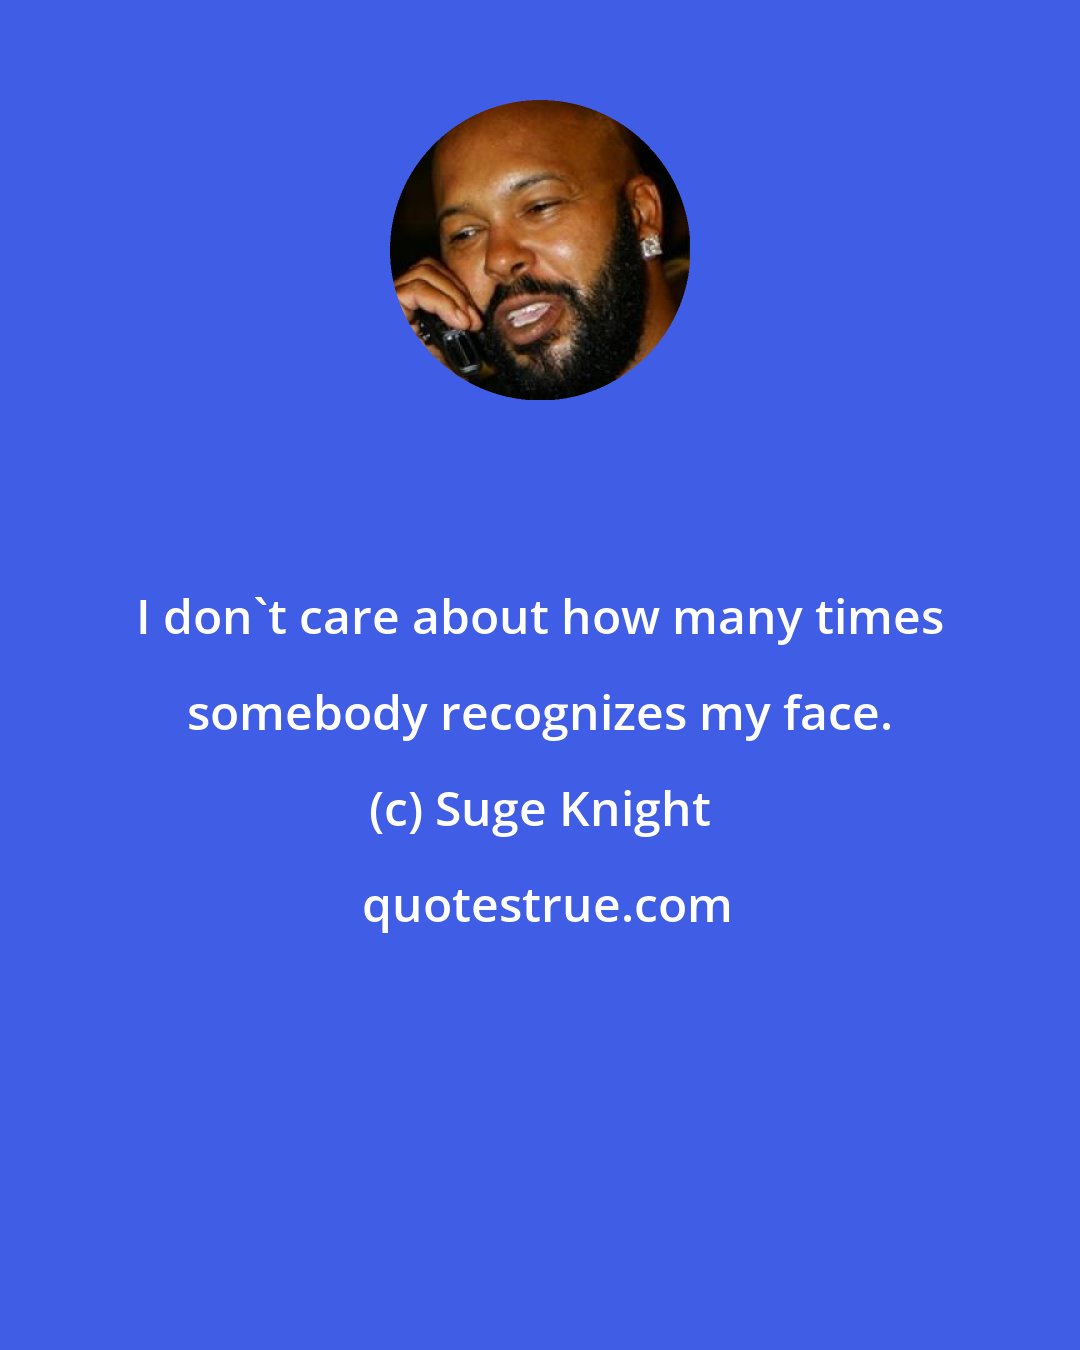 Suge Knight: I don't care about how many times somebody recognizes my face.